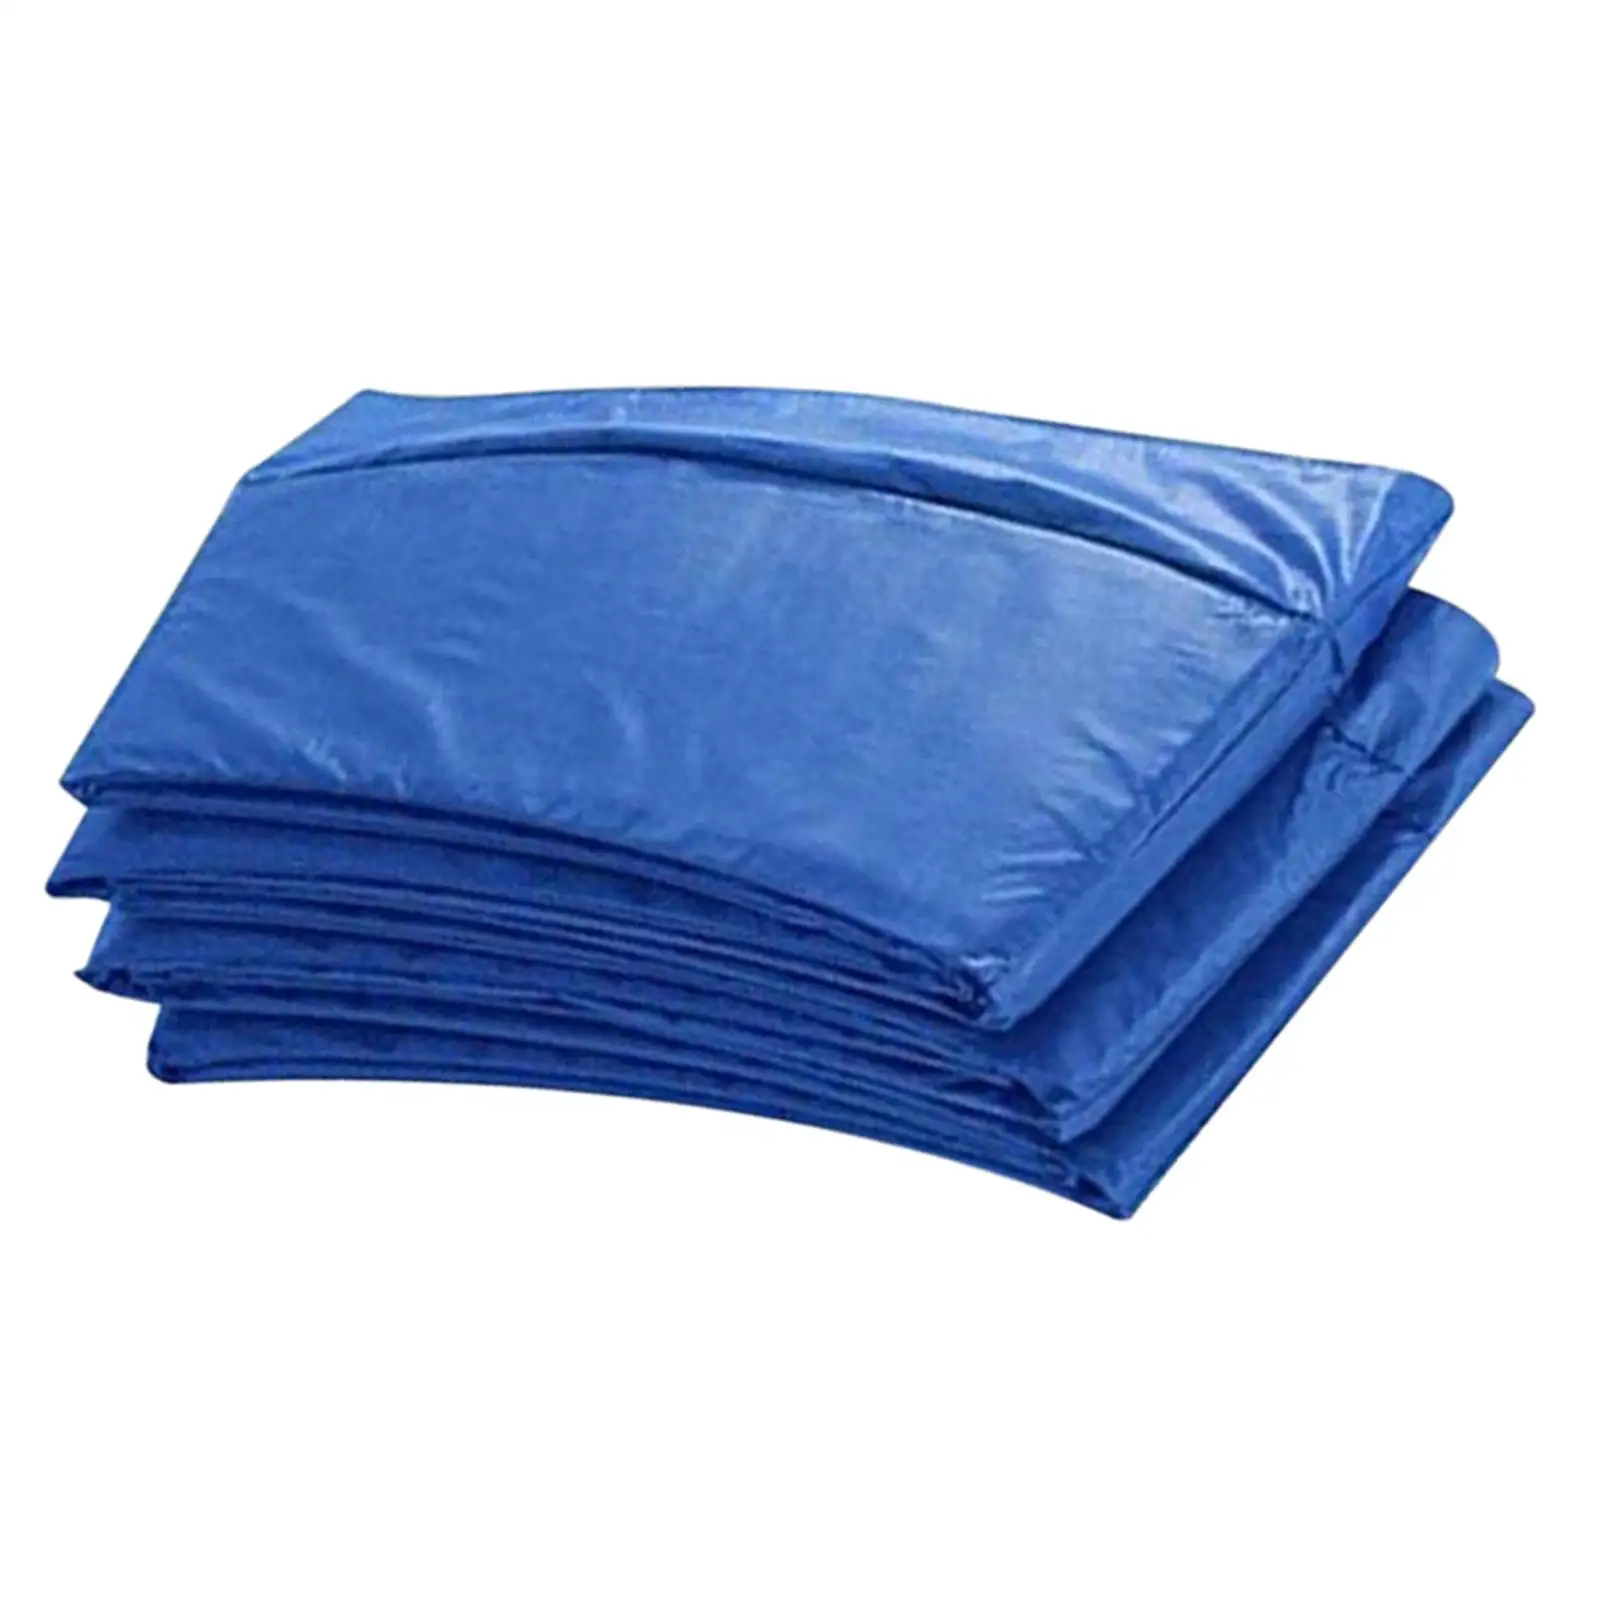 Trampoline Safety Pad Sun Protection Fits Round Trampoline 12ft Side Guard